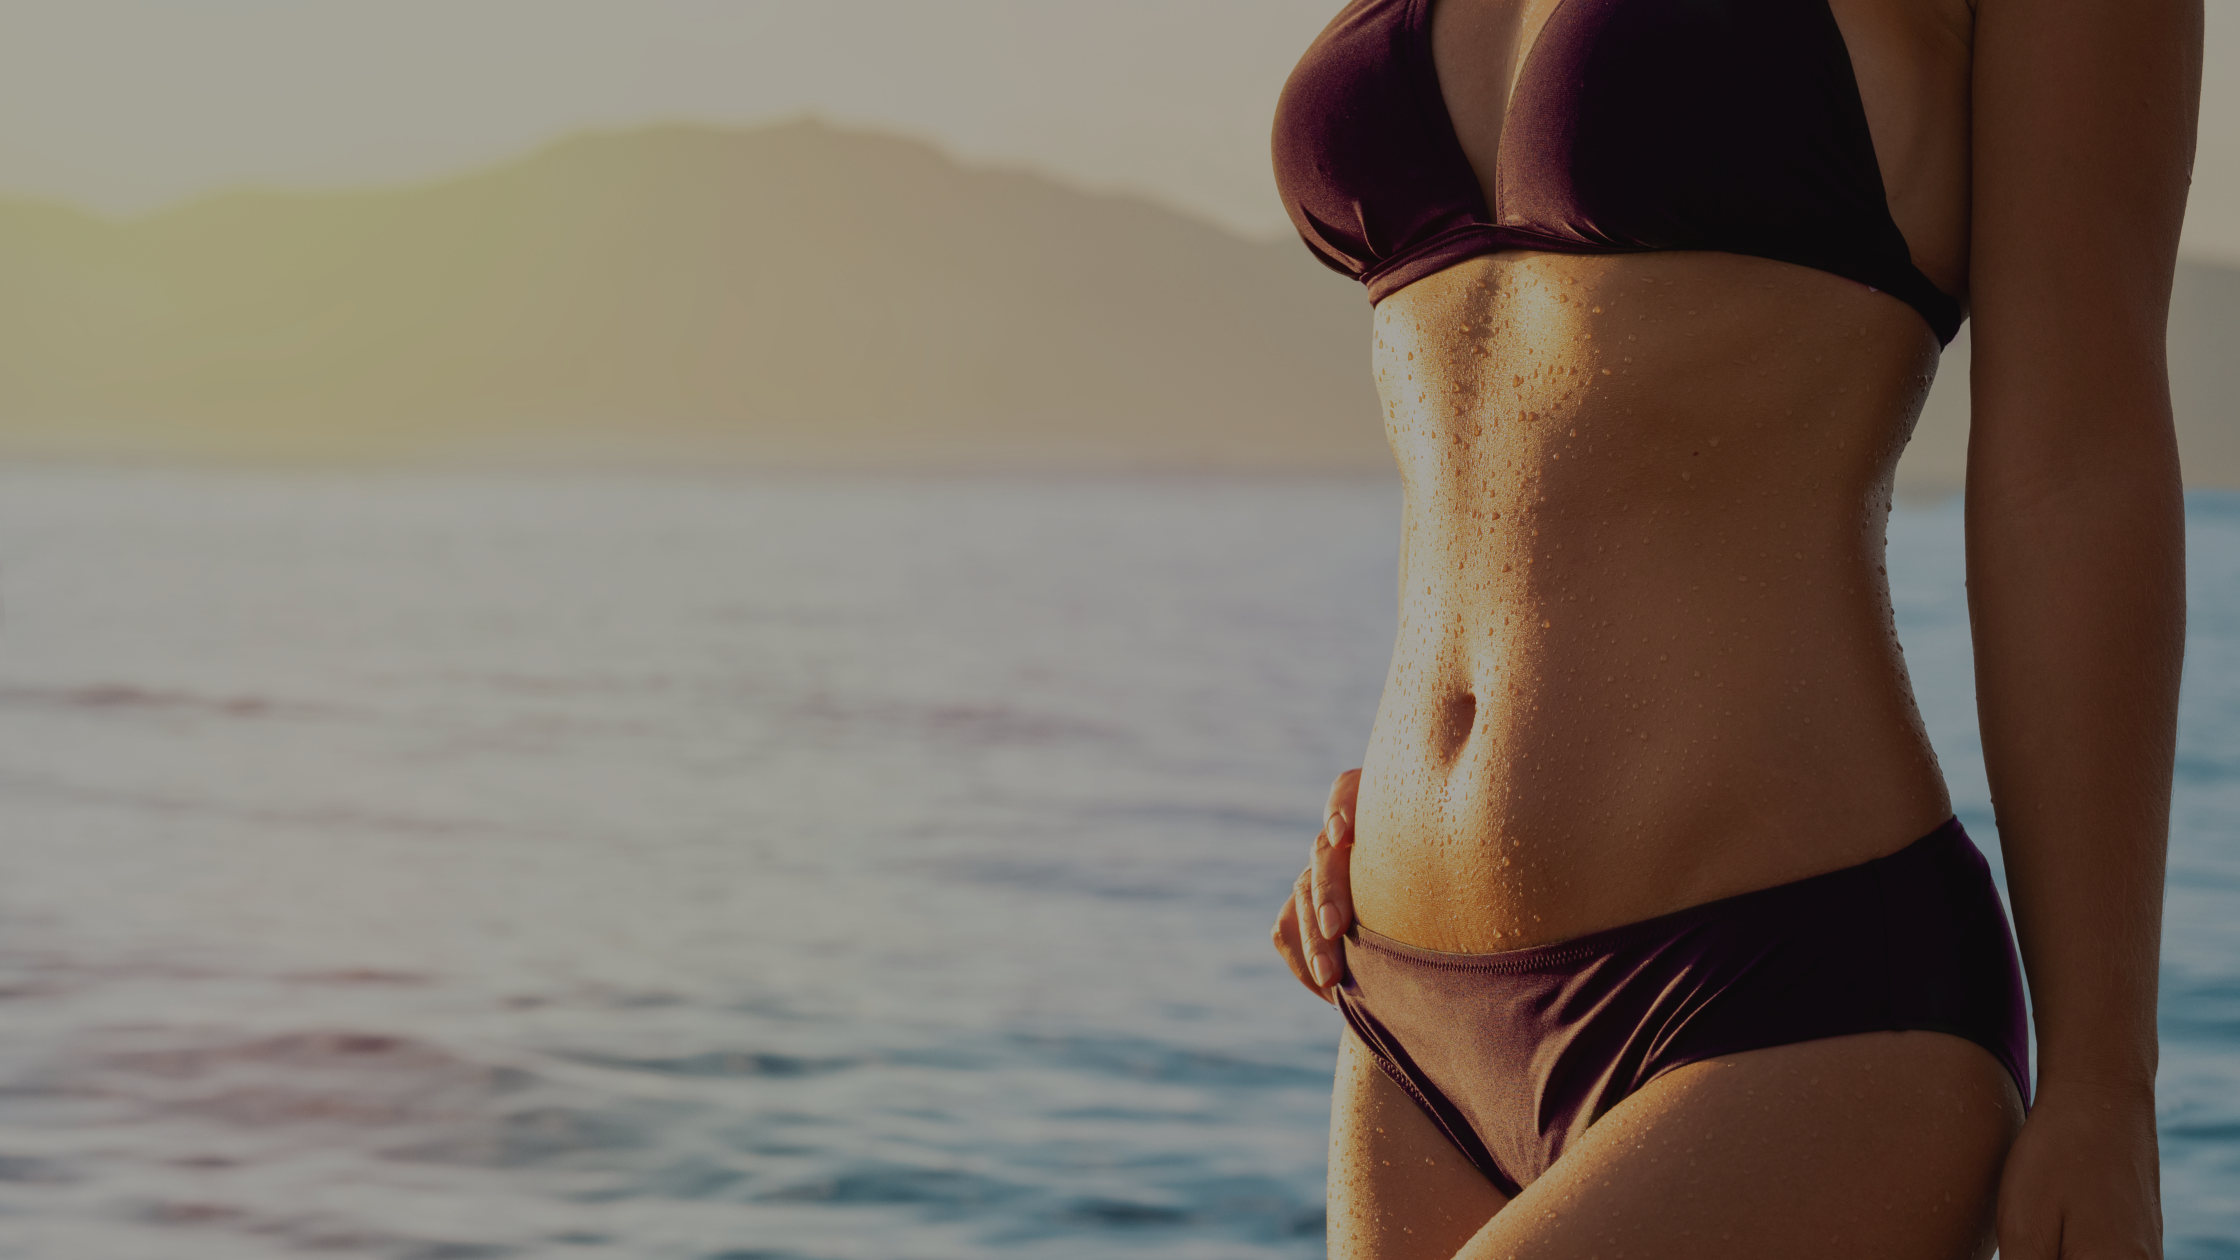 tummy tuck results can be just what a mom needs